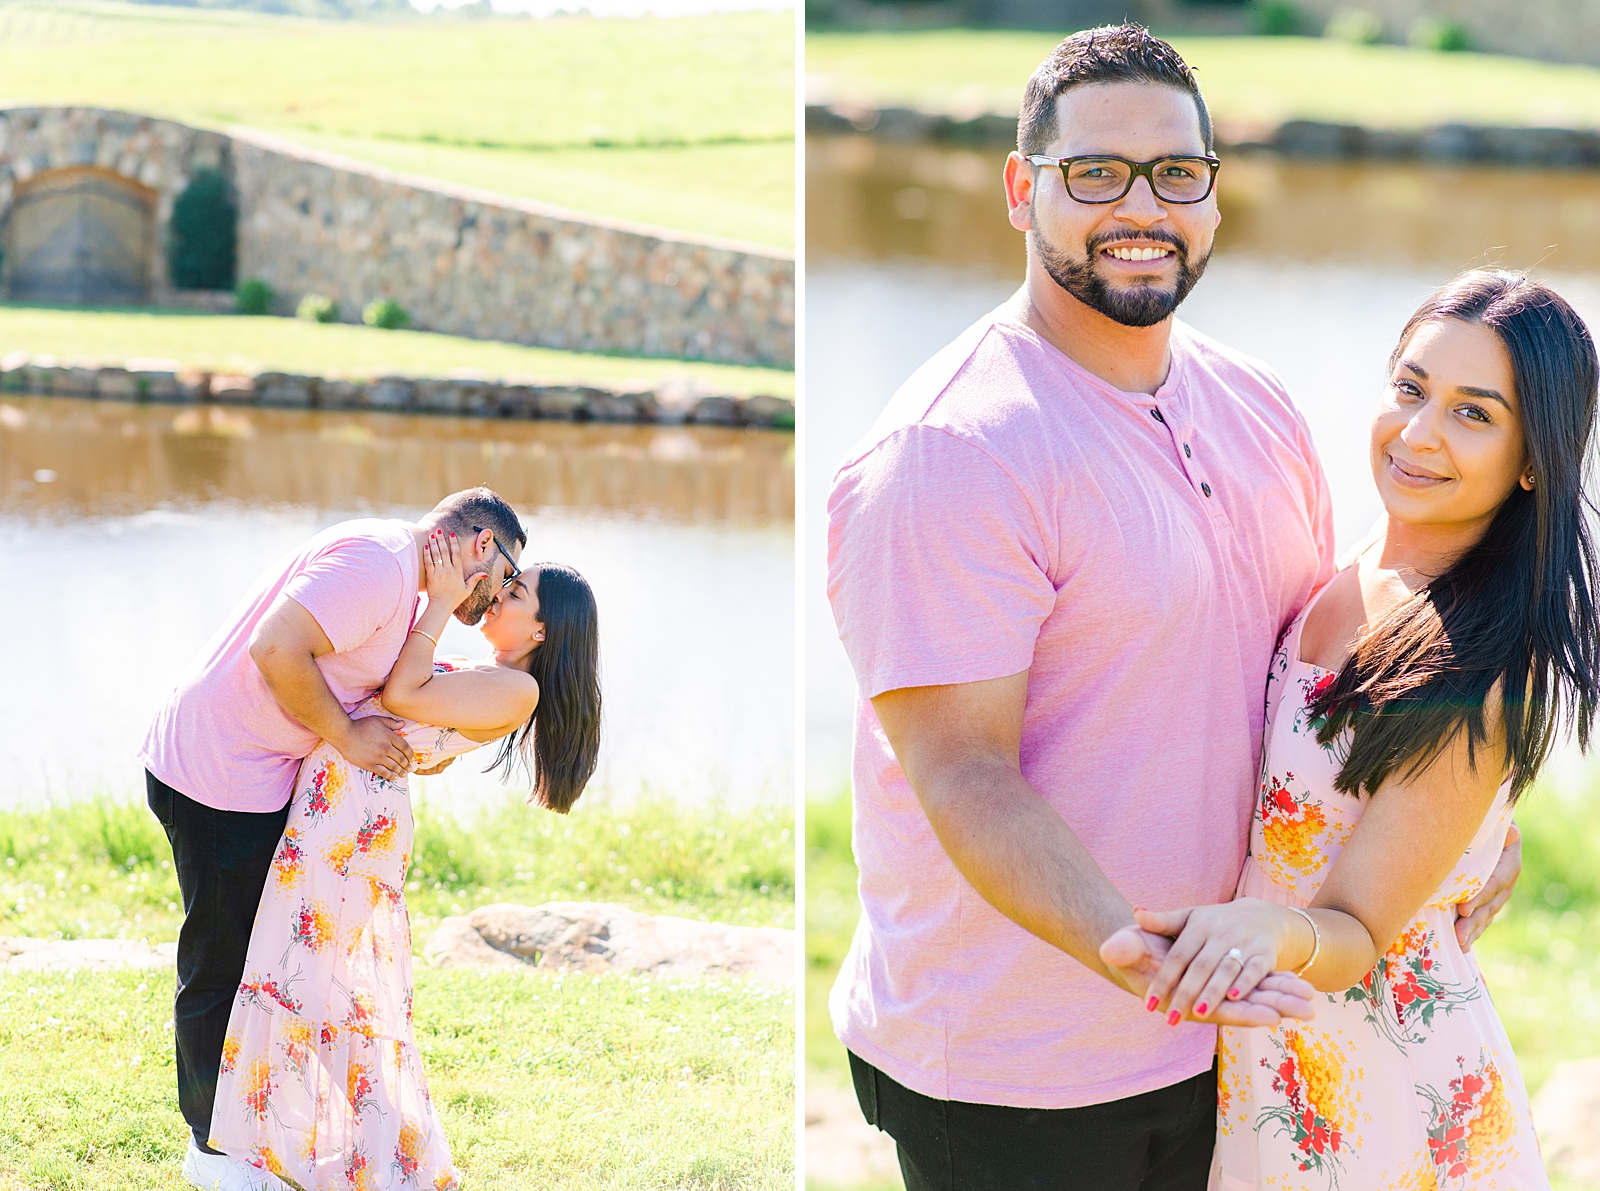 Stone Tower Winery Proposal Photographer StoneTowerWineryProposalPhotograph Stone Tower Winery Wedding Stone Tower Winery Wedding Photographer Stone Tower Winery Wedding Photography by Manali Photography DC Wedding Photographer